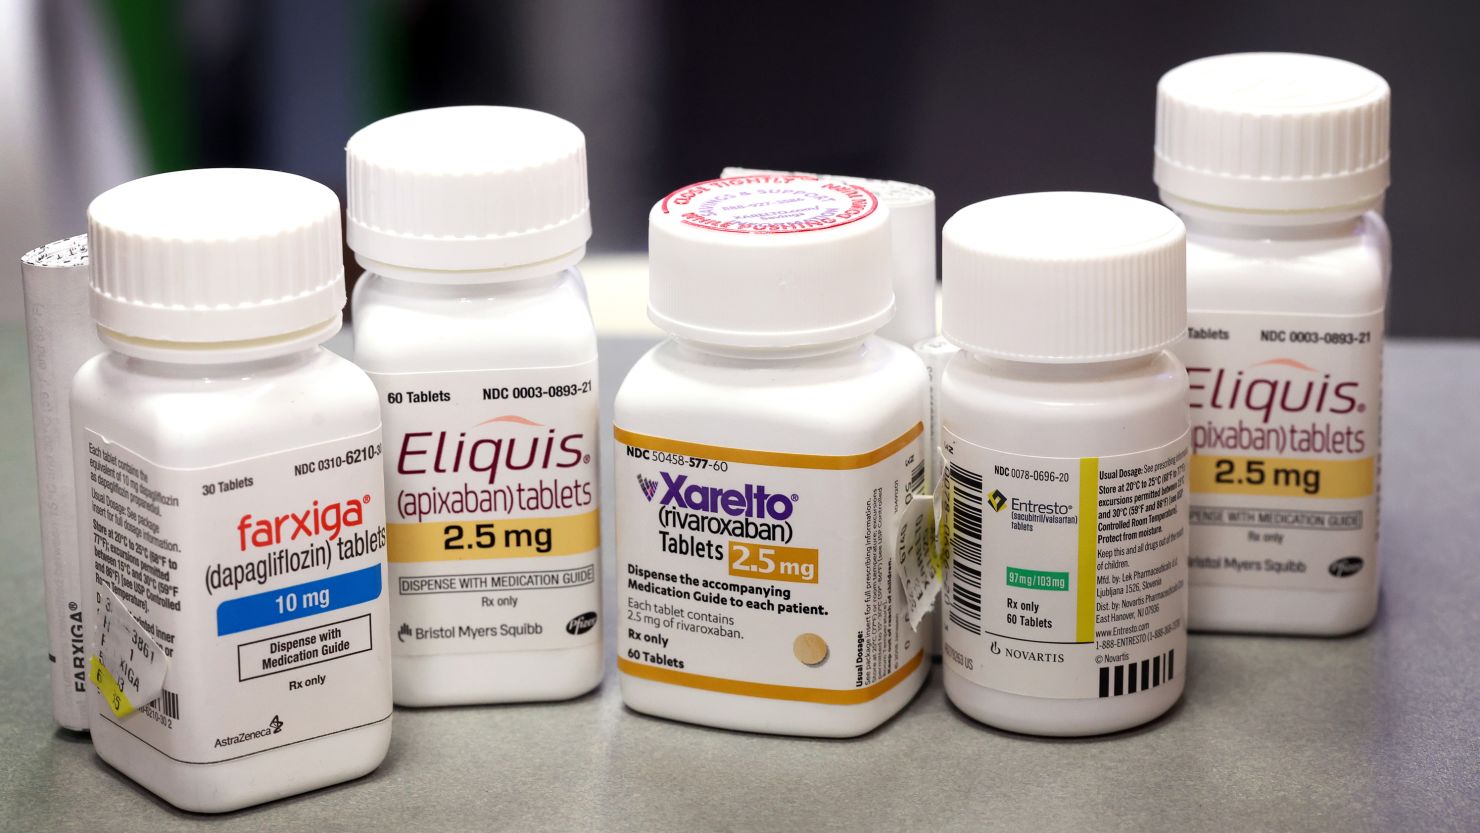 CHICAGO, ILLINOIS - AUGUST 29: In this photo illustration, Farxiga, Xarelto, Entresto, and Eliquis are made available to customers at the New City Halsted Pharmacy on August 29, 2023 in Chicago, Illinois. These are 4 of 10 prescription drugs that will be subject to Medicare price negotiations under the Inflation Reduction Act. The other drugs include Jardiance, Enbrel, Januvia, Imbruvica, Stelara and Fiasp. (Photo Illustration by Scott Olson/Getty Images)